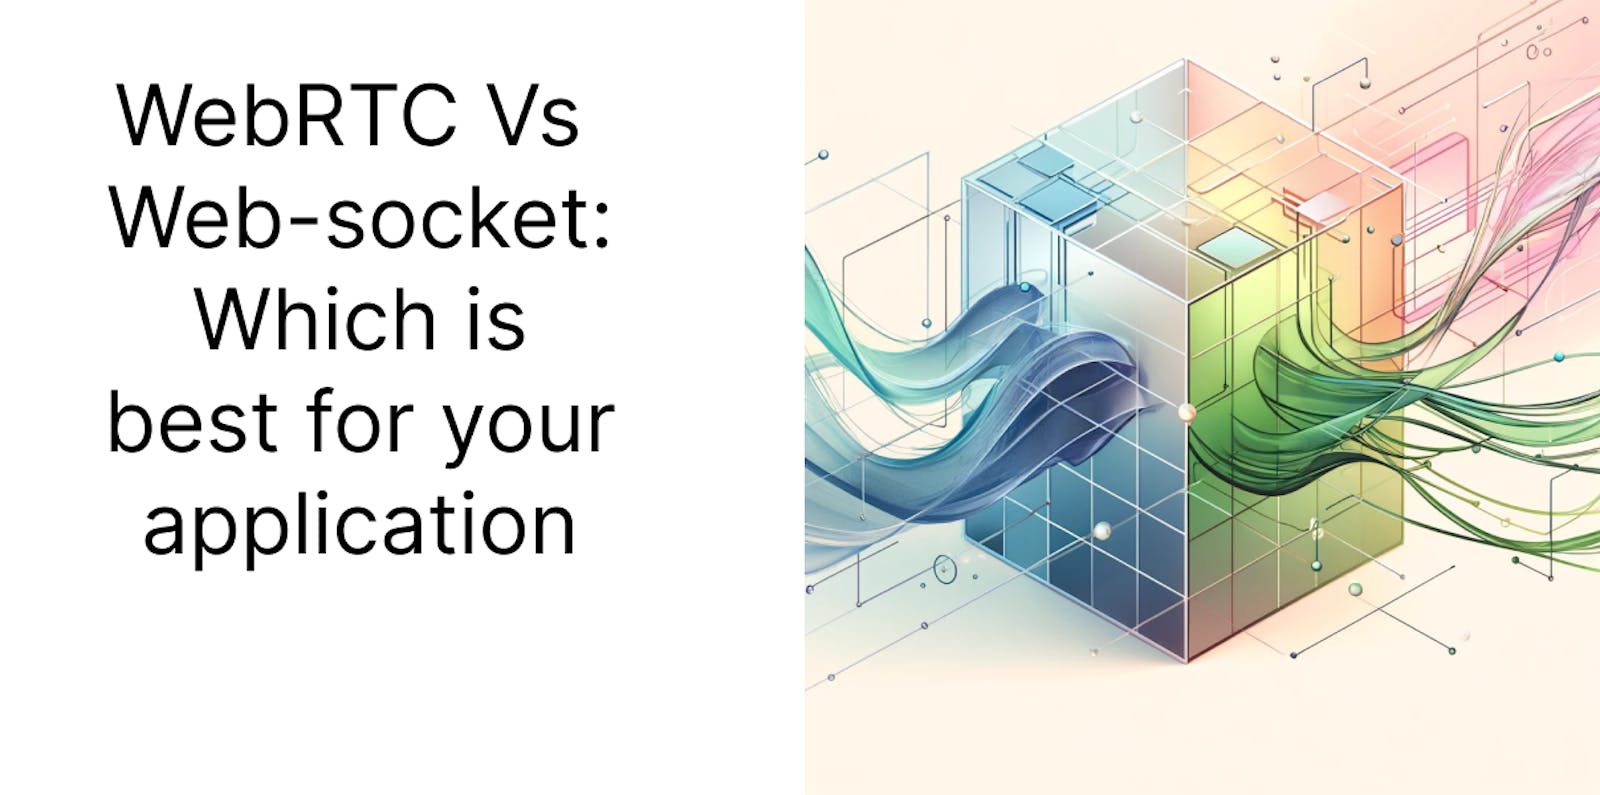 WebRTC Vs Websocket: Which is best for your application